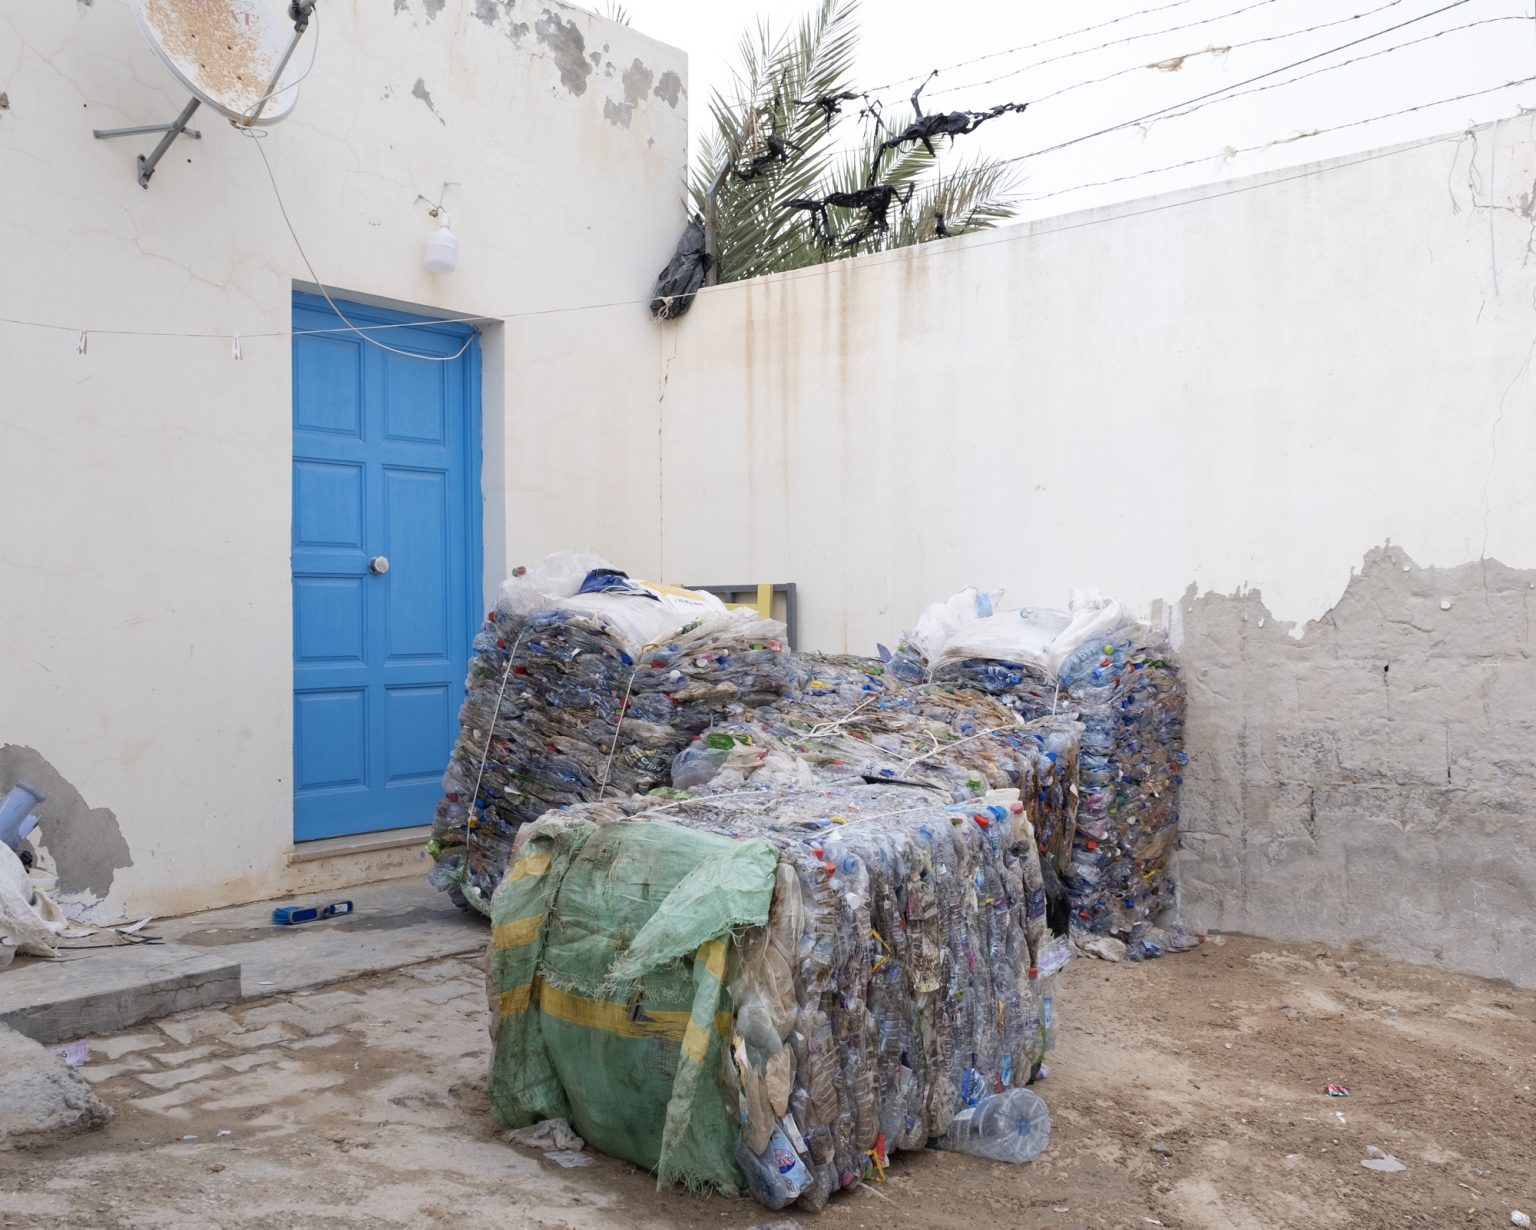 Kerkennah Islands (Tunisia), June 2022 - Plastic recycling factory. Plastic waste represents a big problem for the island's ecosystem. Born in 2014, Kerkenna Plastic is committed to tackling the problem through a system of collectors that recover the plastic and take it to the recycling center, where it is pressed and prepared to be sold to Spain. In 2021, 92 tons of plastic were collected. Collectors are paid 800 millim per kg and on average each collector can collect about 50 kg per day.
><
Isole Kerkennah (Tunisia), giugno 2022 - Fabbrica di riciclaggio della plastica. I rifiuti in plastica rappresentano un grande problema per lecosistema dellisola. Nata nel 2014, Kerkenna Plastic, si impegna a far fronte al problema attraverso un sistema di raccoglitori che recuperano la plastica e la portano al centro di riciclaggio, dove viene pressata e preparata per essere venduta alla Spagna. Nel 2021 sono state collezionate 92 tonnellate di plastica. Ai raccoglitori viene pagata 800 millim al kg e di media ogni raccoglitore può arrivare a raccoglierne circa 50 kg al giorno.